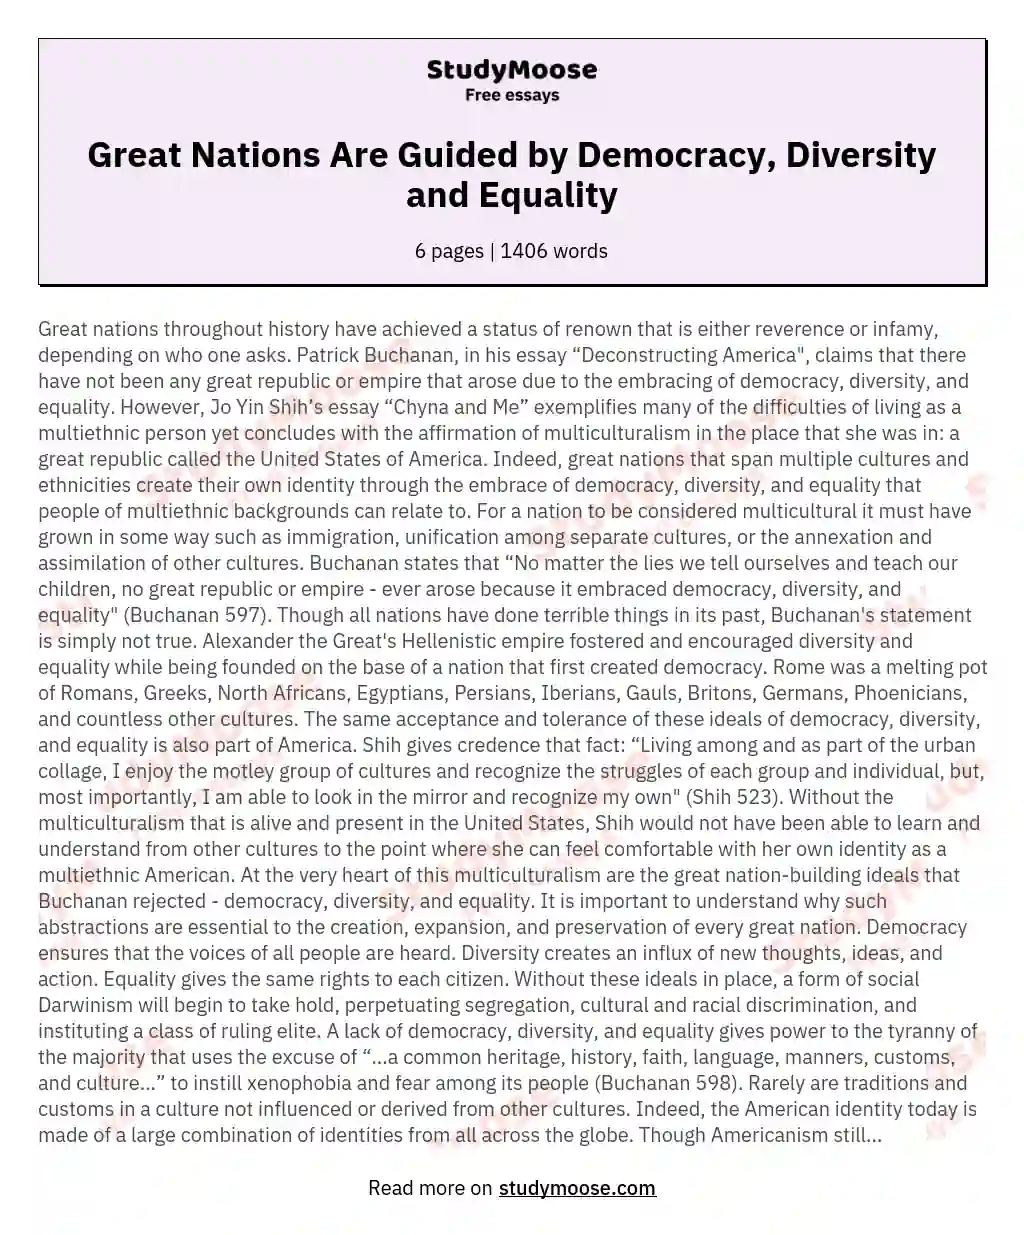 Great Nations Are Guided by Democracy, Diversity and Equality essay